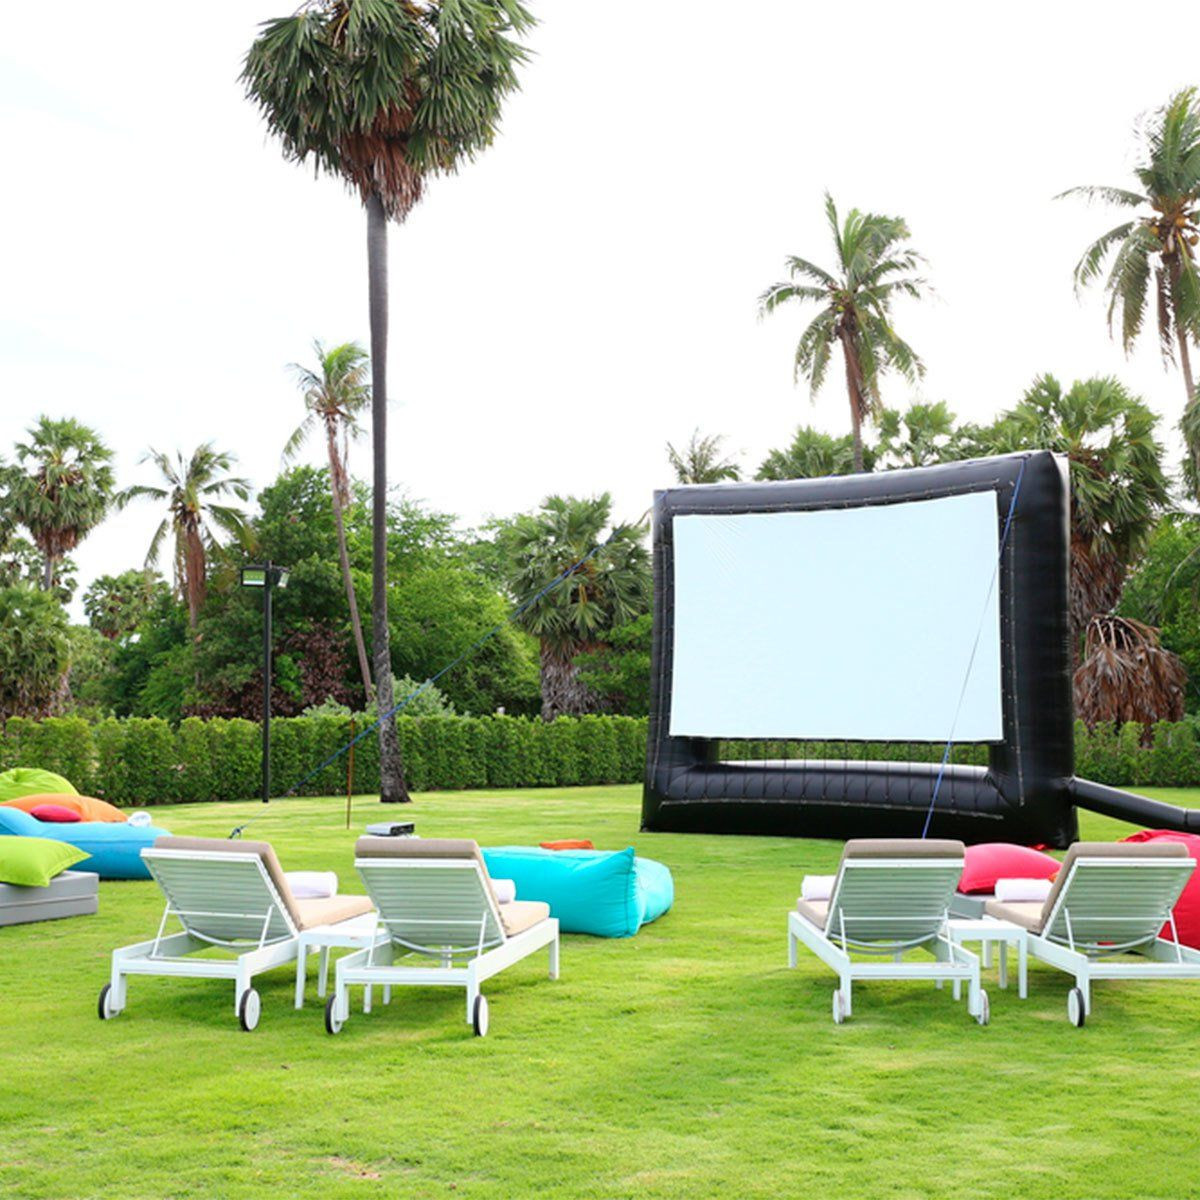 DIY Outdoor Theatre Screen
 What You Need for a DIY Backyard Movie Theater